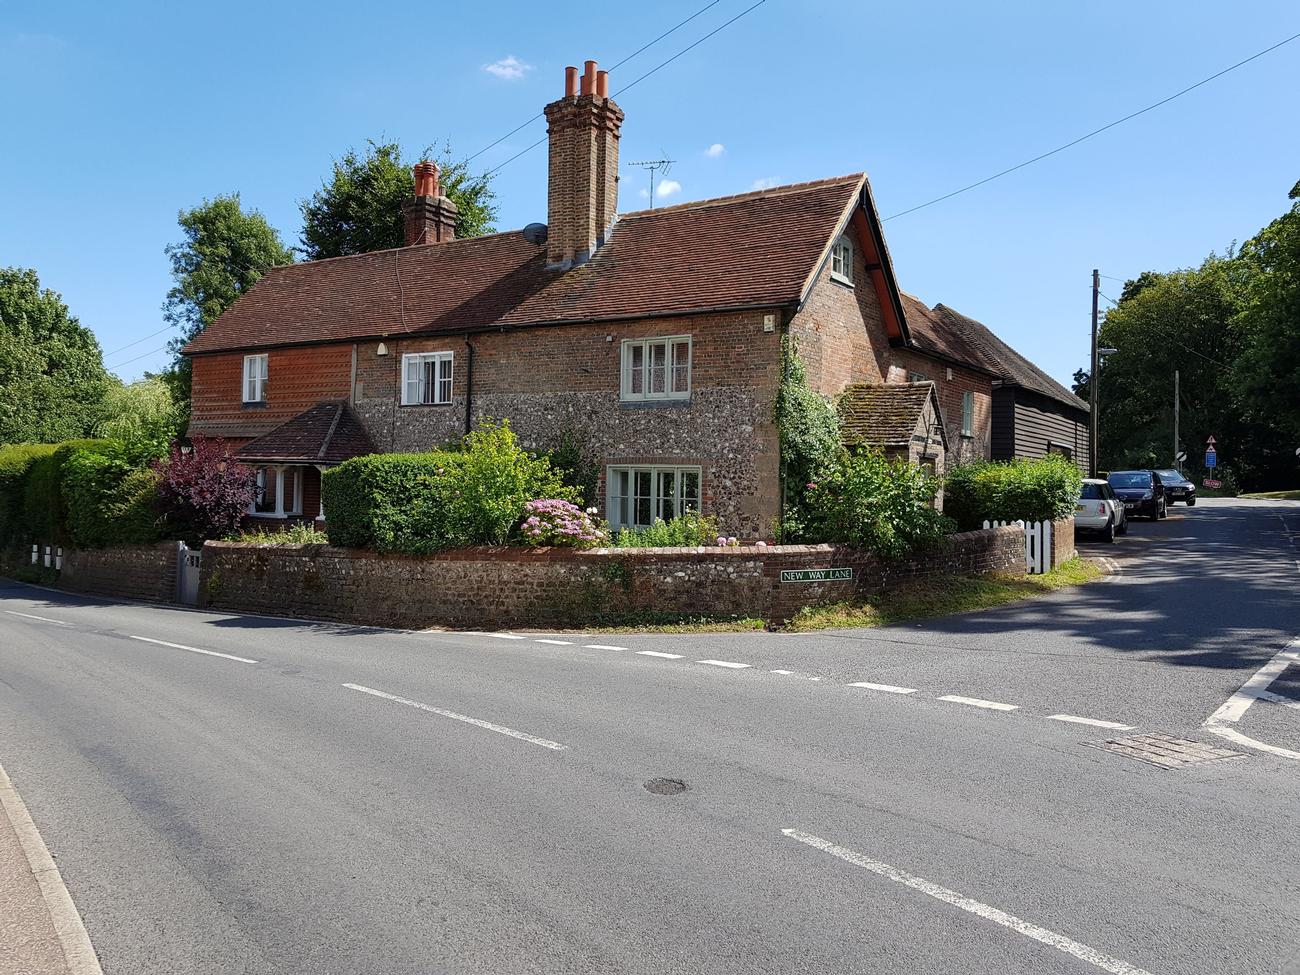 Gallery | Chartered Surveyor in Hurstpeirpoint and West Sussex gallery image 19